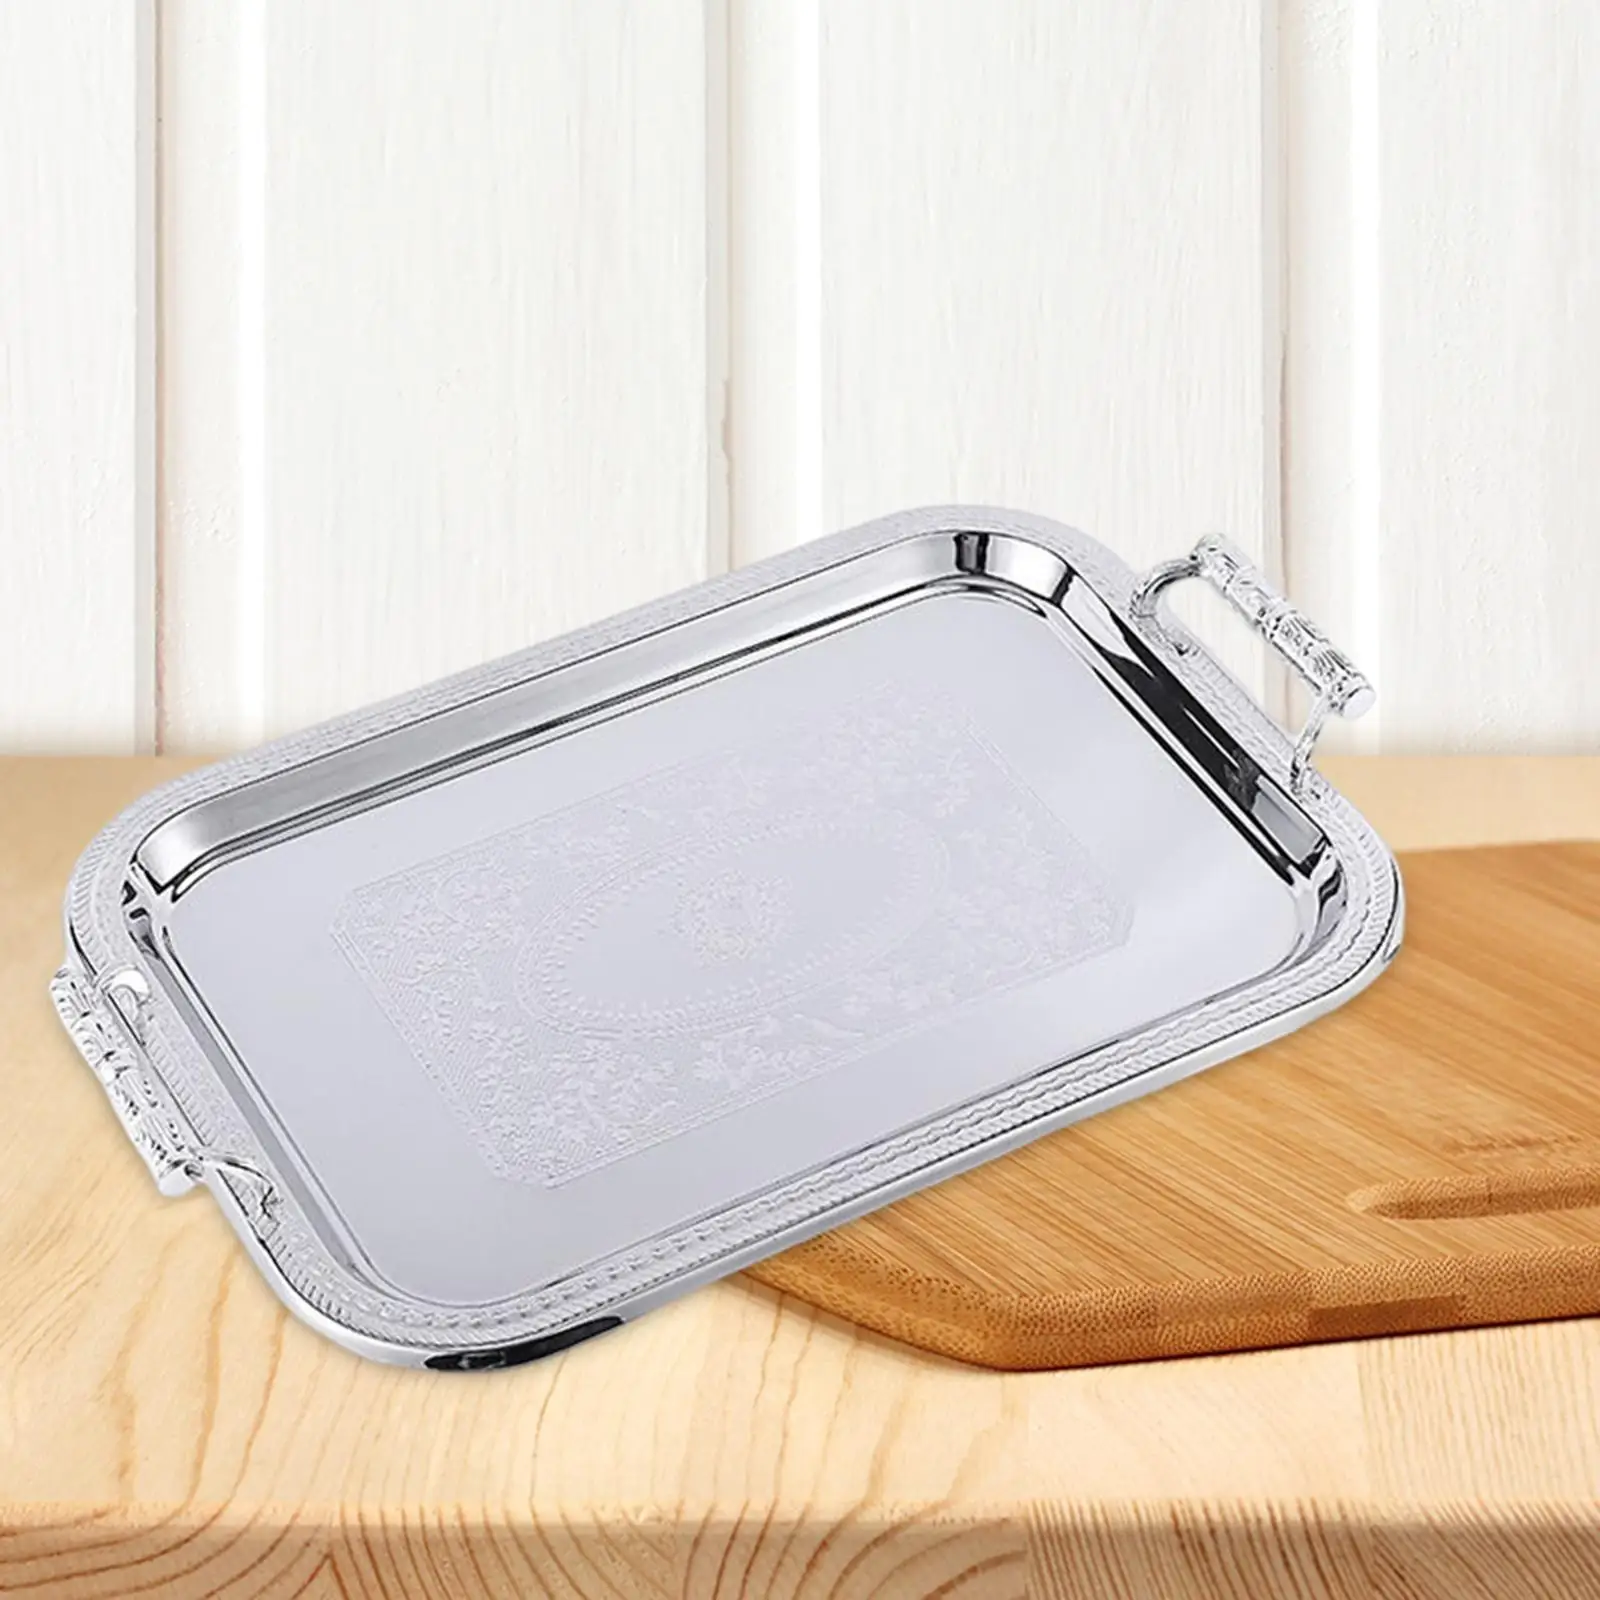 Modern Elegant Rectangle Serving Tray with Handles Decorative Tray for Living Room Restaurant Table Eating Storing Home